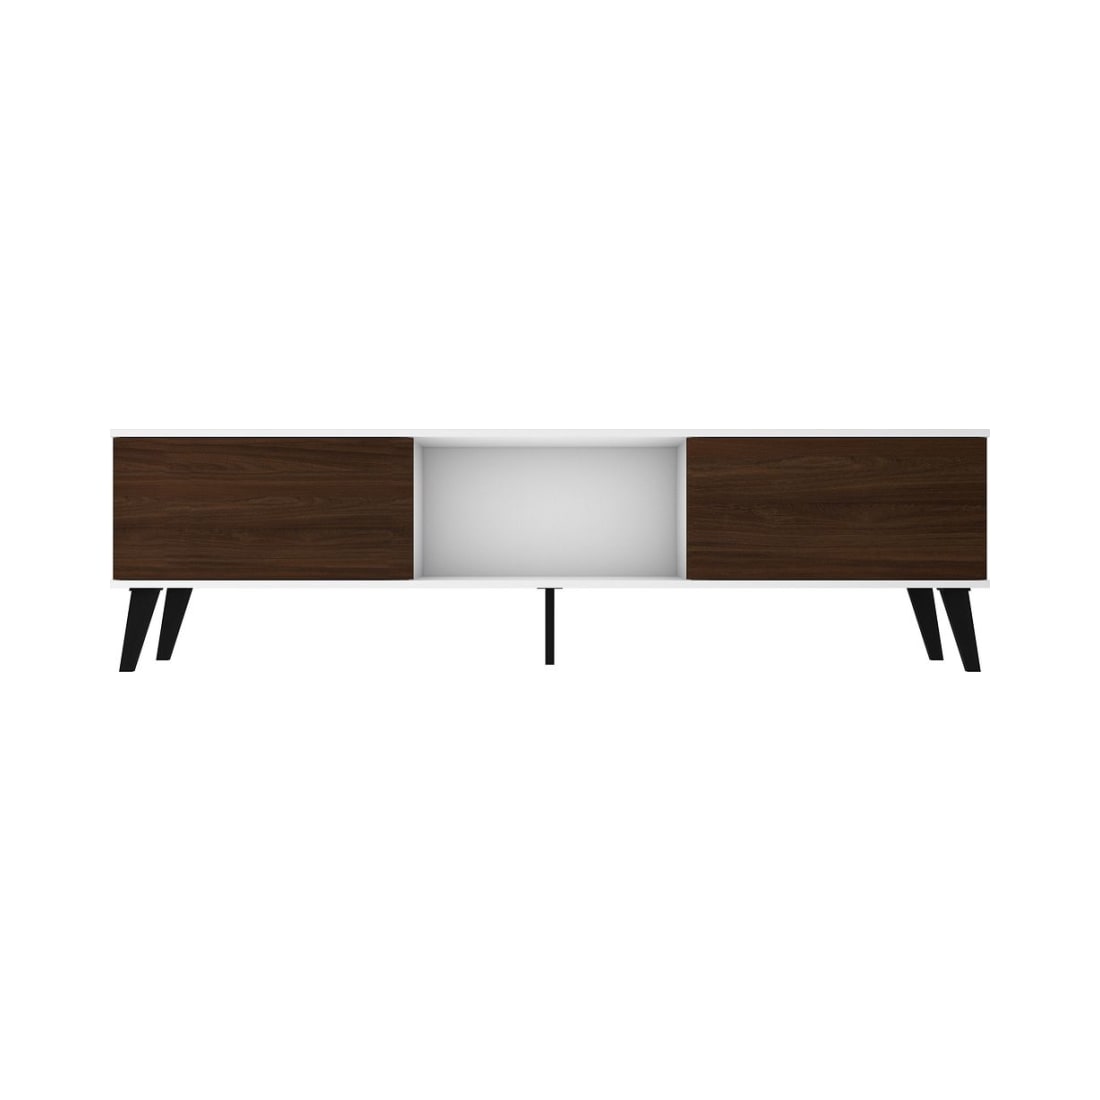 Doyers 70.87” TV Stand in White and Nut Brown